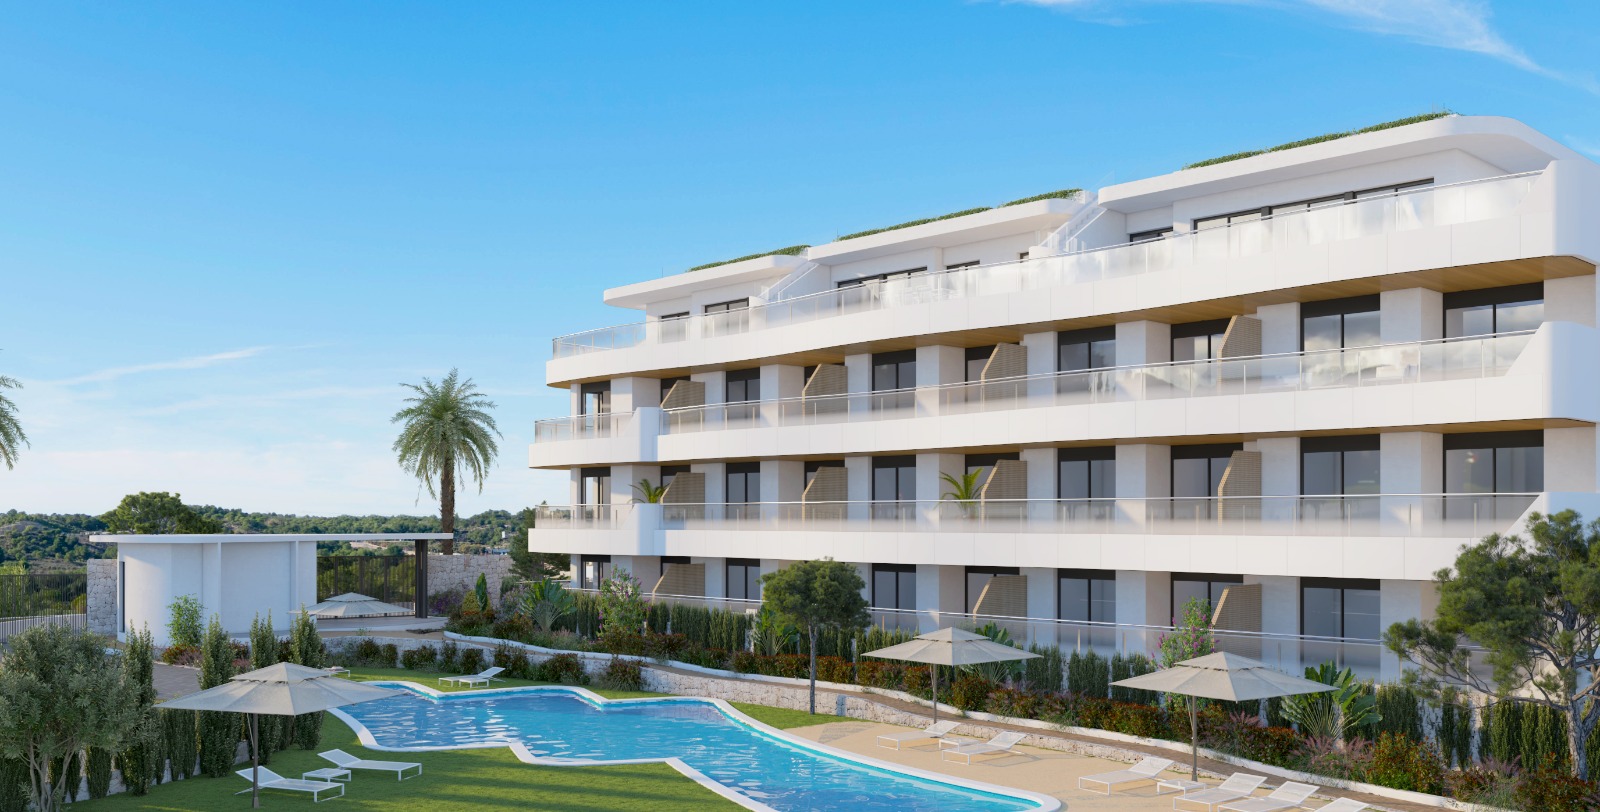 New-built groundfloor apartments for sale in the heart of Playa Flamenca.